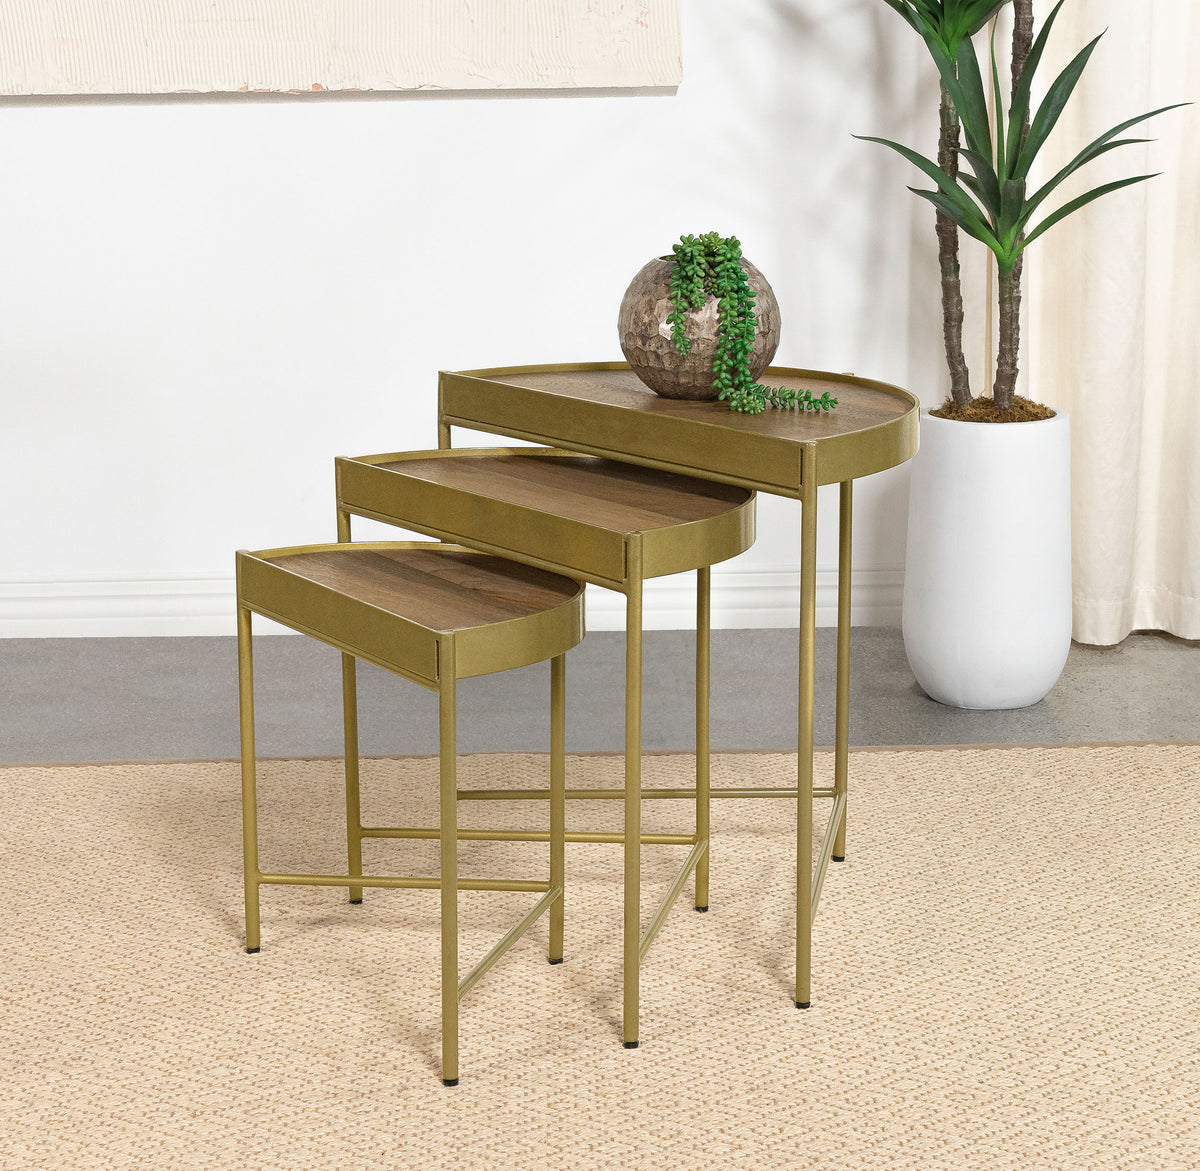 Tristen 3-Piece Demilune Nesting Table With Recessed Top Brown and Gold Tristen 3-Piece Demilune Nesting Table With Recessed Top Brown and Gold Half Price Furniture